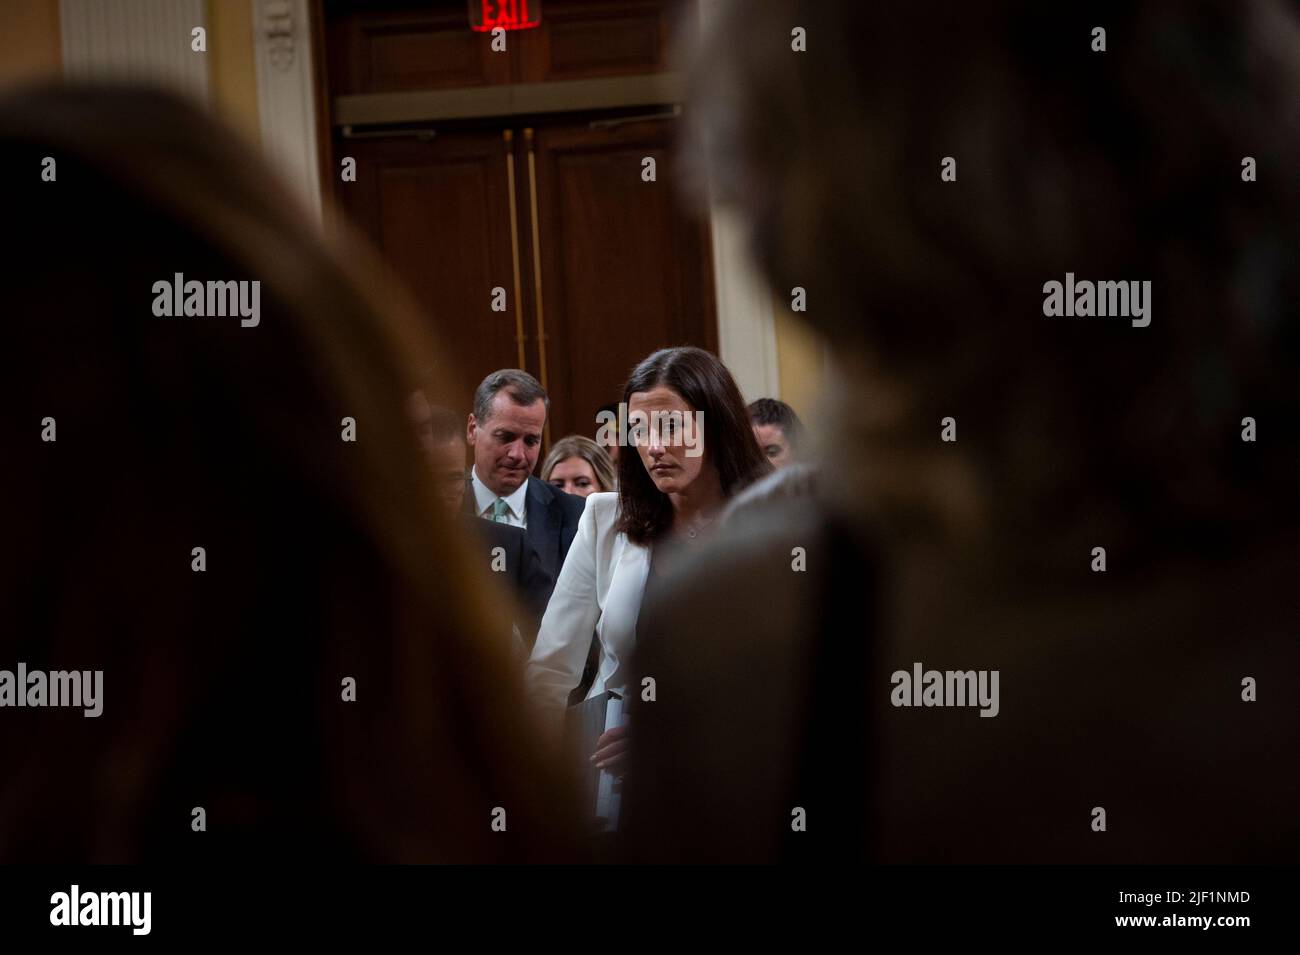 Washington, United States Of America. 28th June, 2022. Cassidy Hutchinson, an aide to former White House Chief of Staff Mark Meadows, makes her departure following day six of the United States House Select Committee to Investigate the January 6th Attack on the US Capitol hearing on Capitol Hill in Washington, DC on June 28, 2022. Credit: Rod Lamkey/CNP/Sipa USA Credit: Sipa USA/Alamy Live News Stock Photo